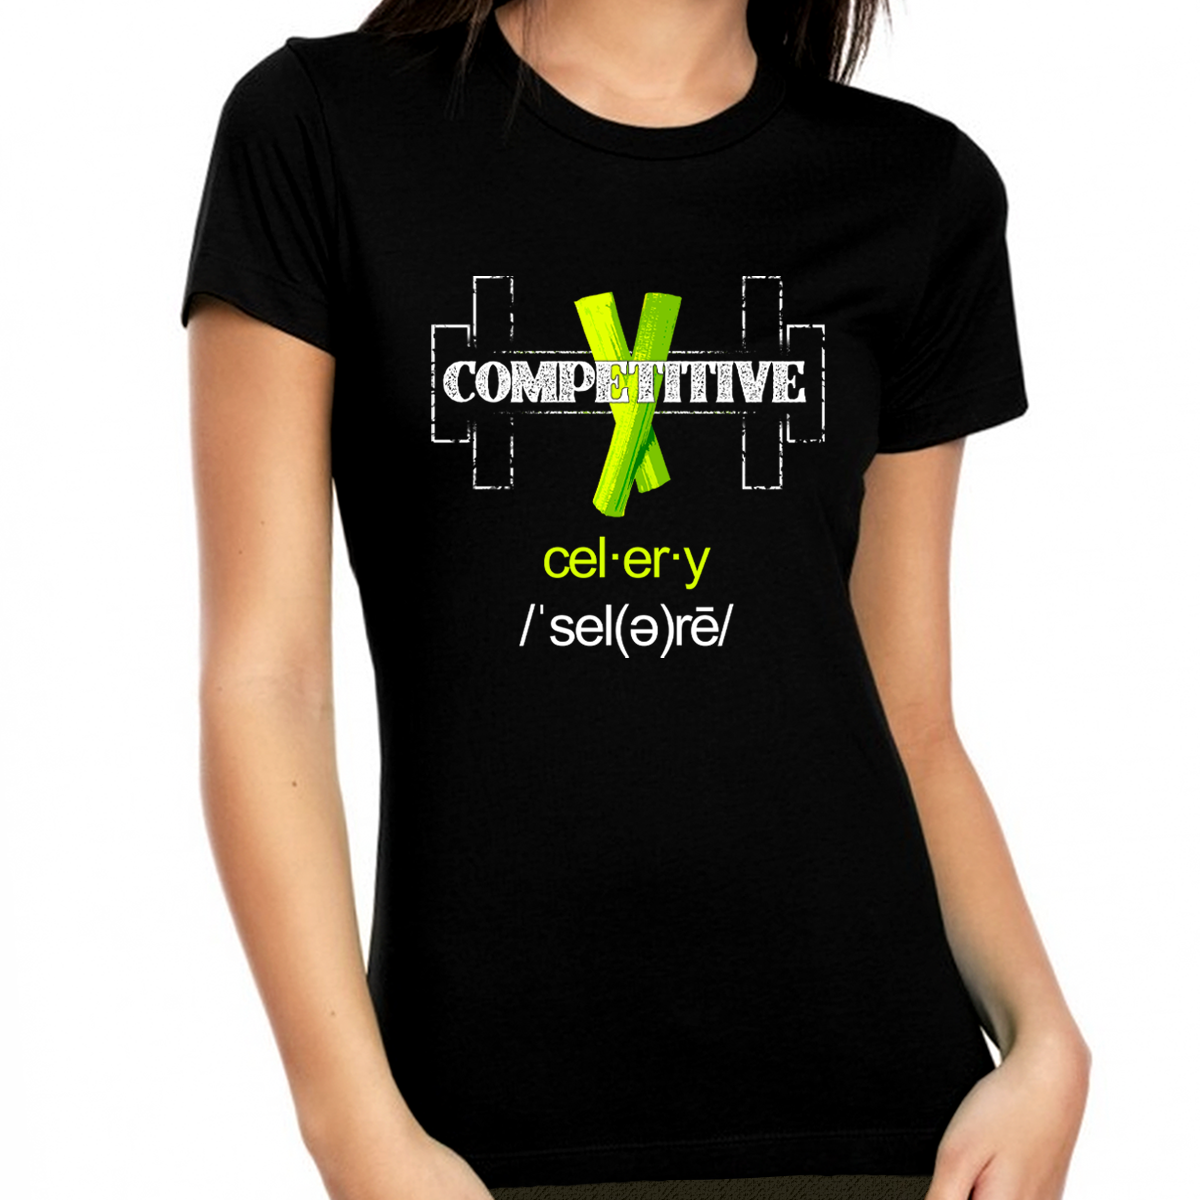 Funny Novelty Competitive Celery Work Out Tops for WOMEN & TEENS - Retro Vintage Graphic Tees